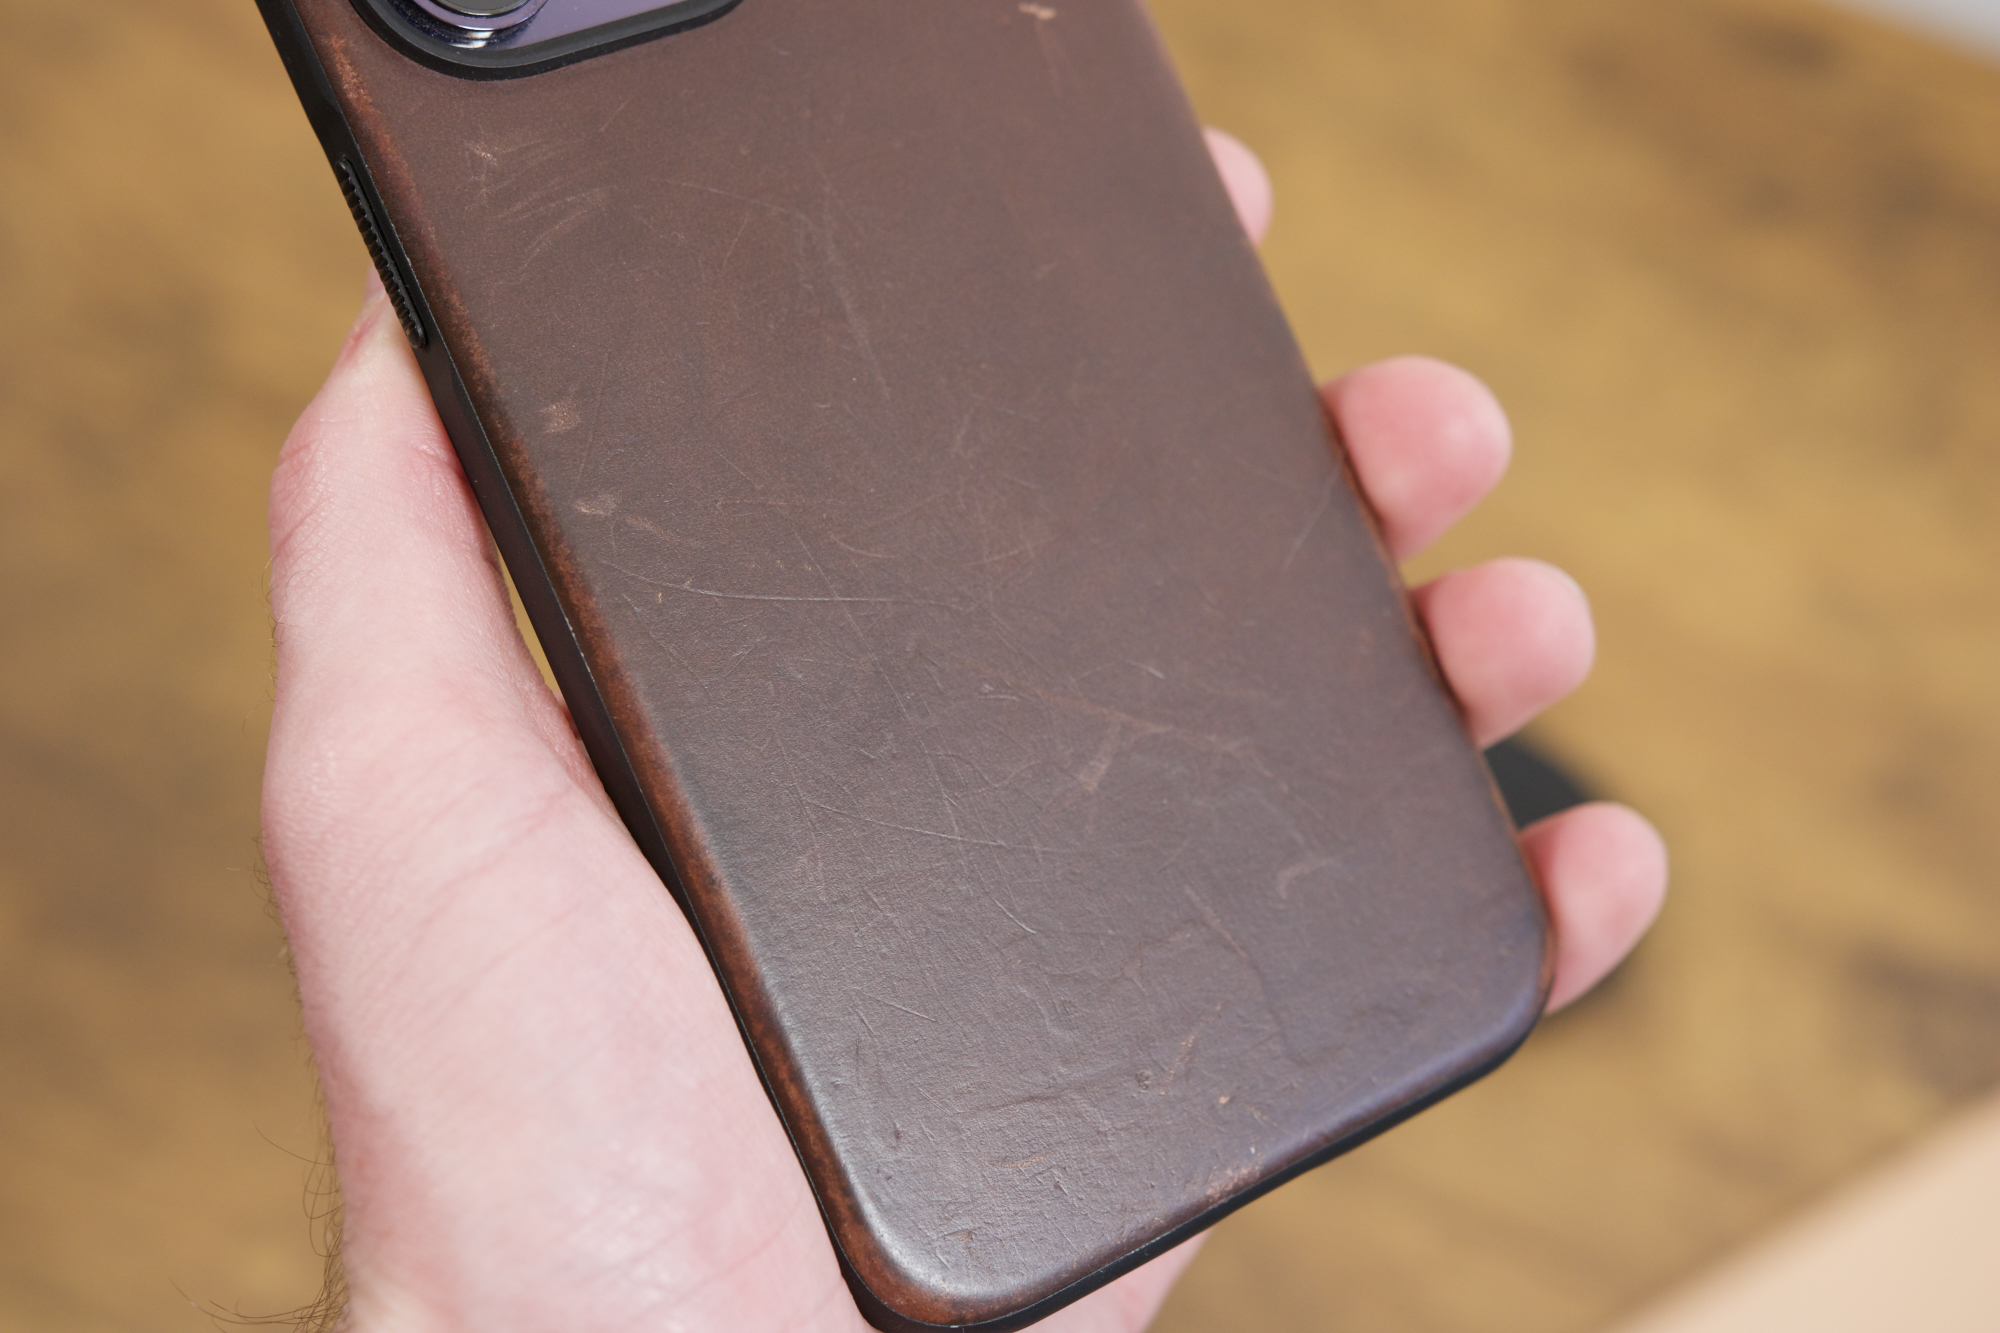 Nomad's Modern Leather case on an iPhone 14 Pro Max.